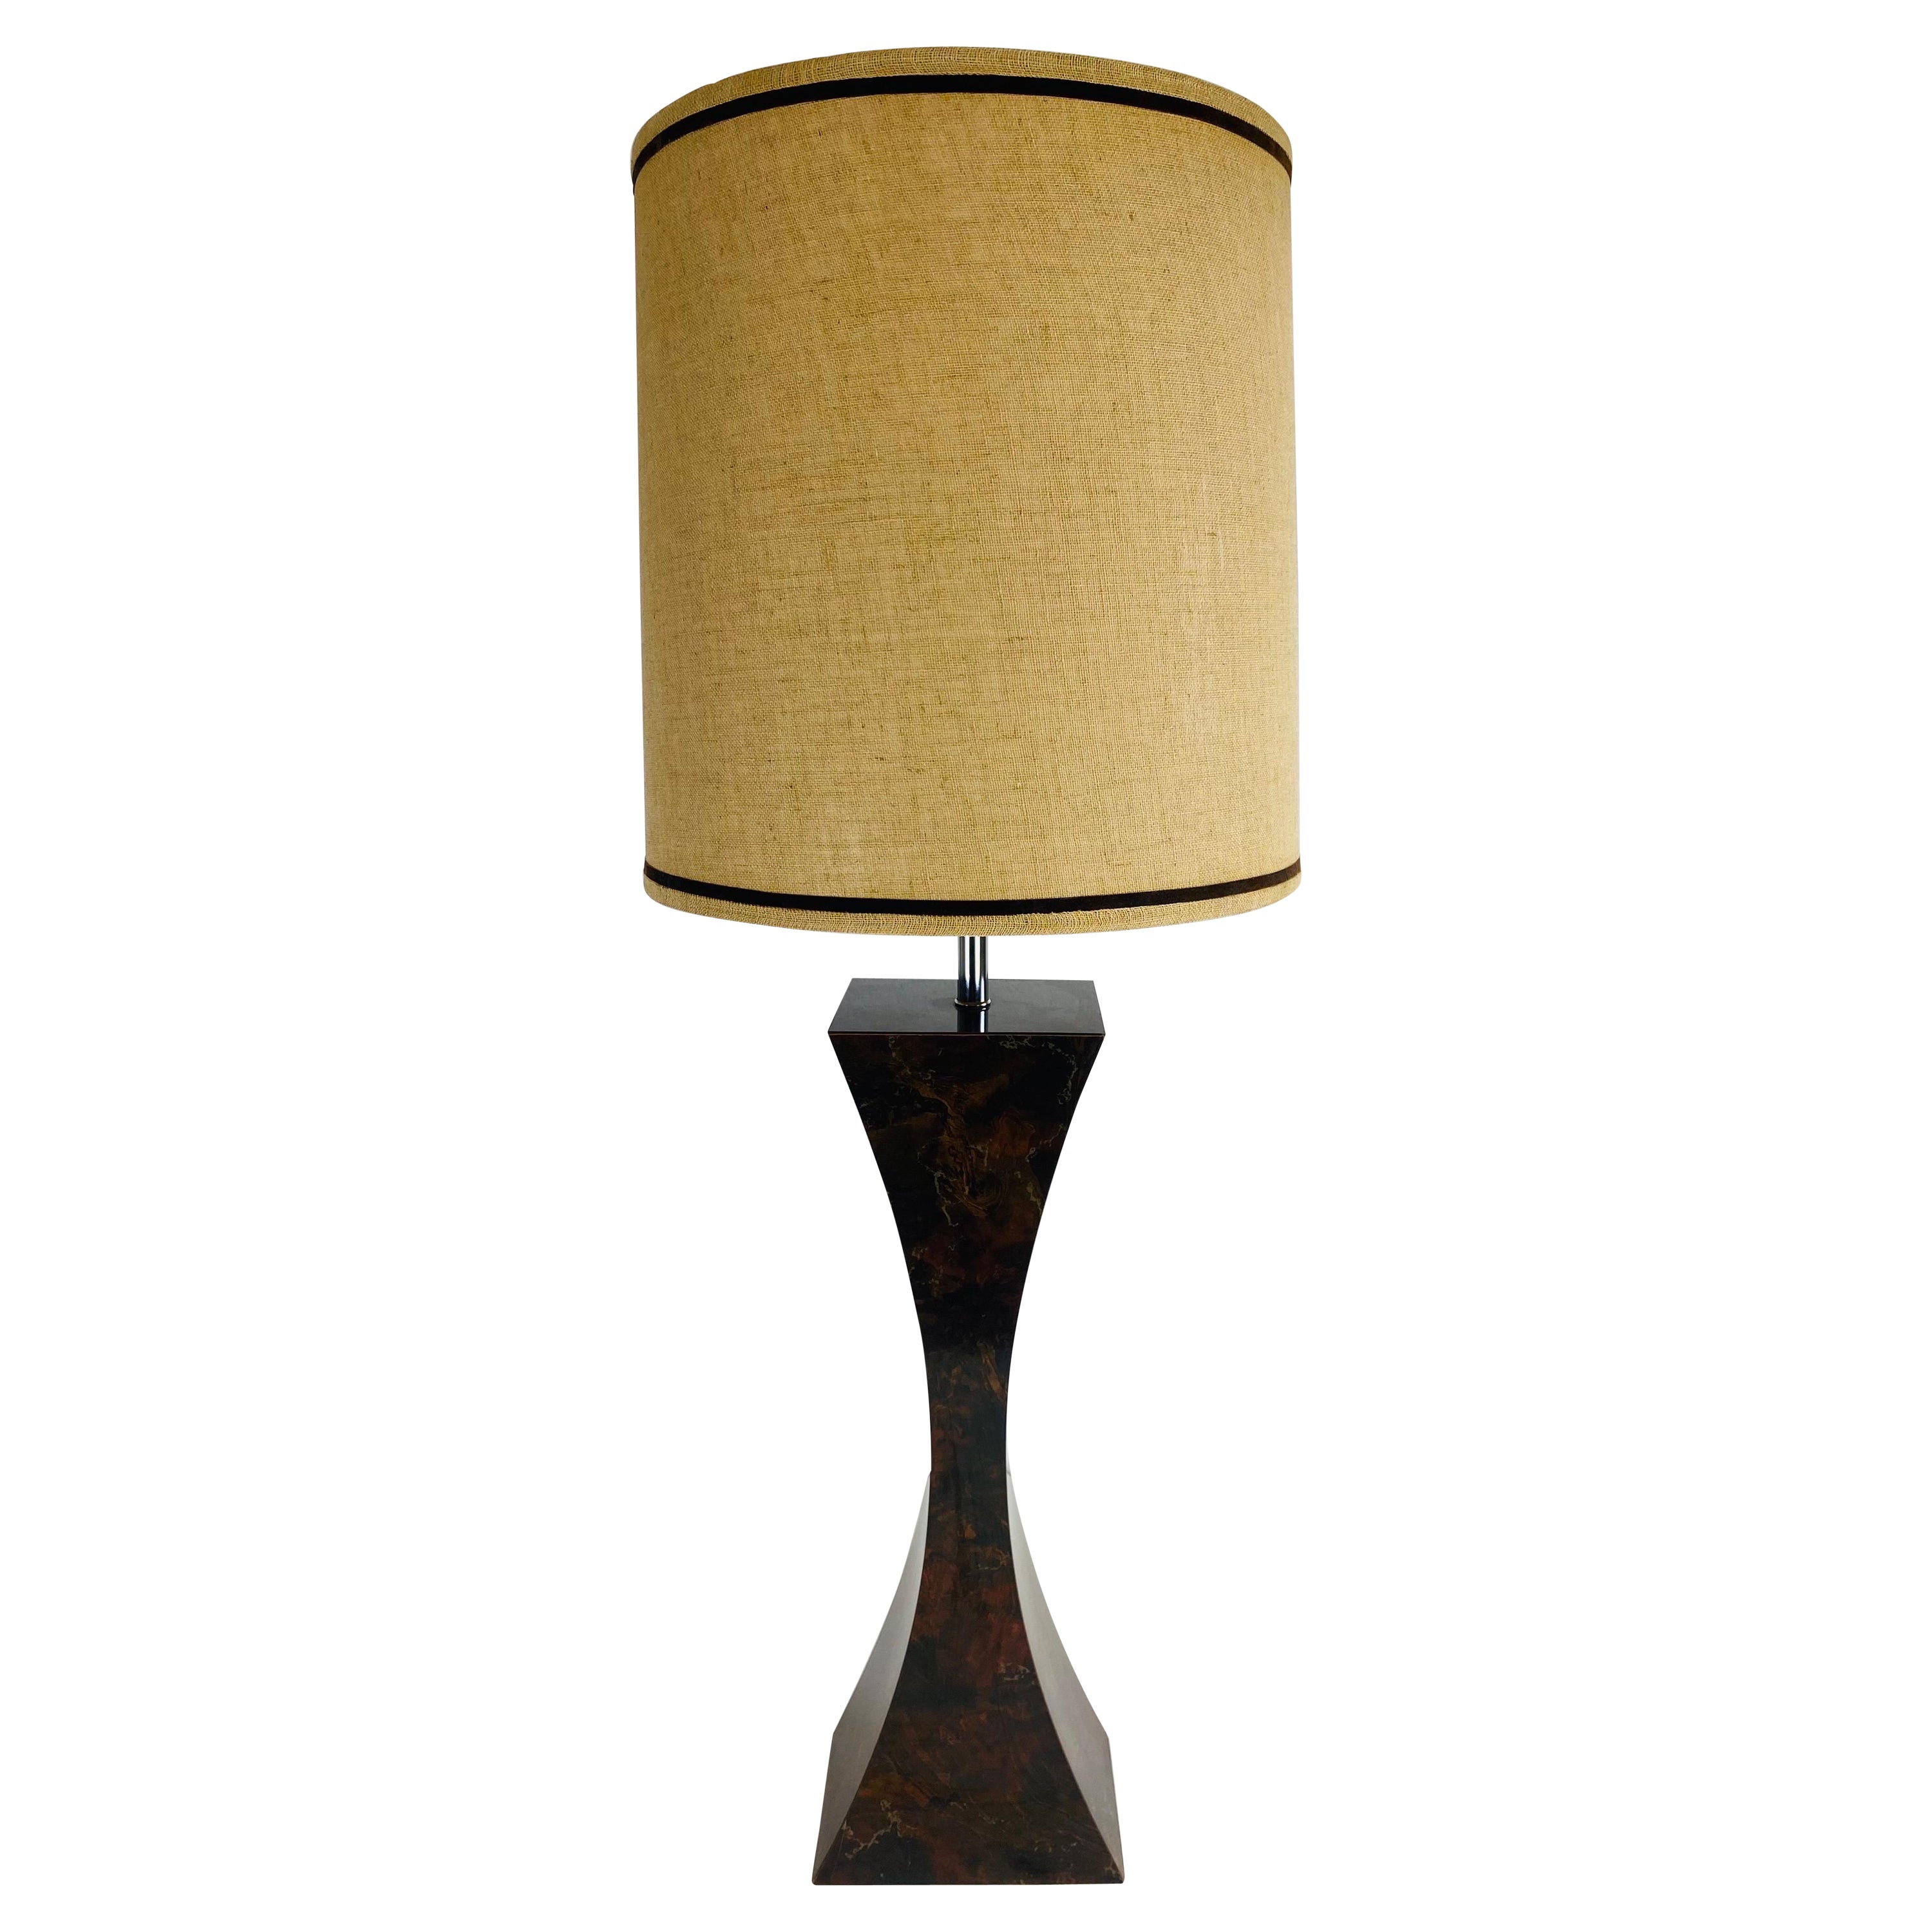 Large mid century modern faux marble table lamp.